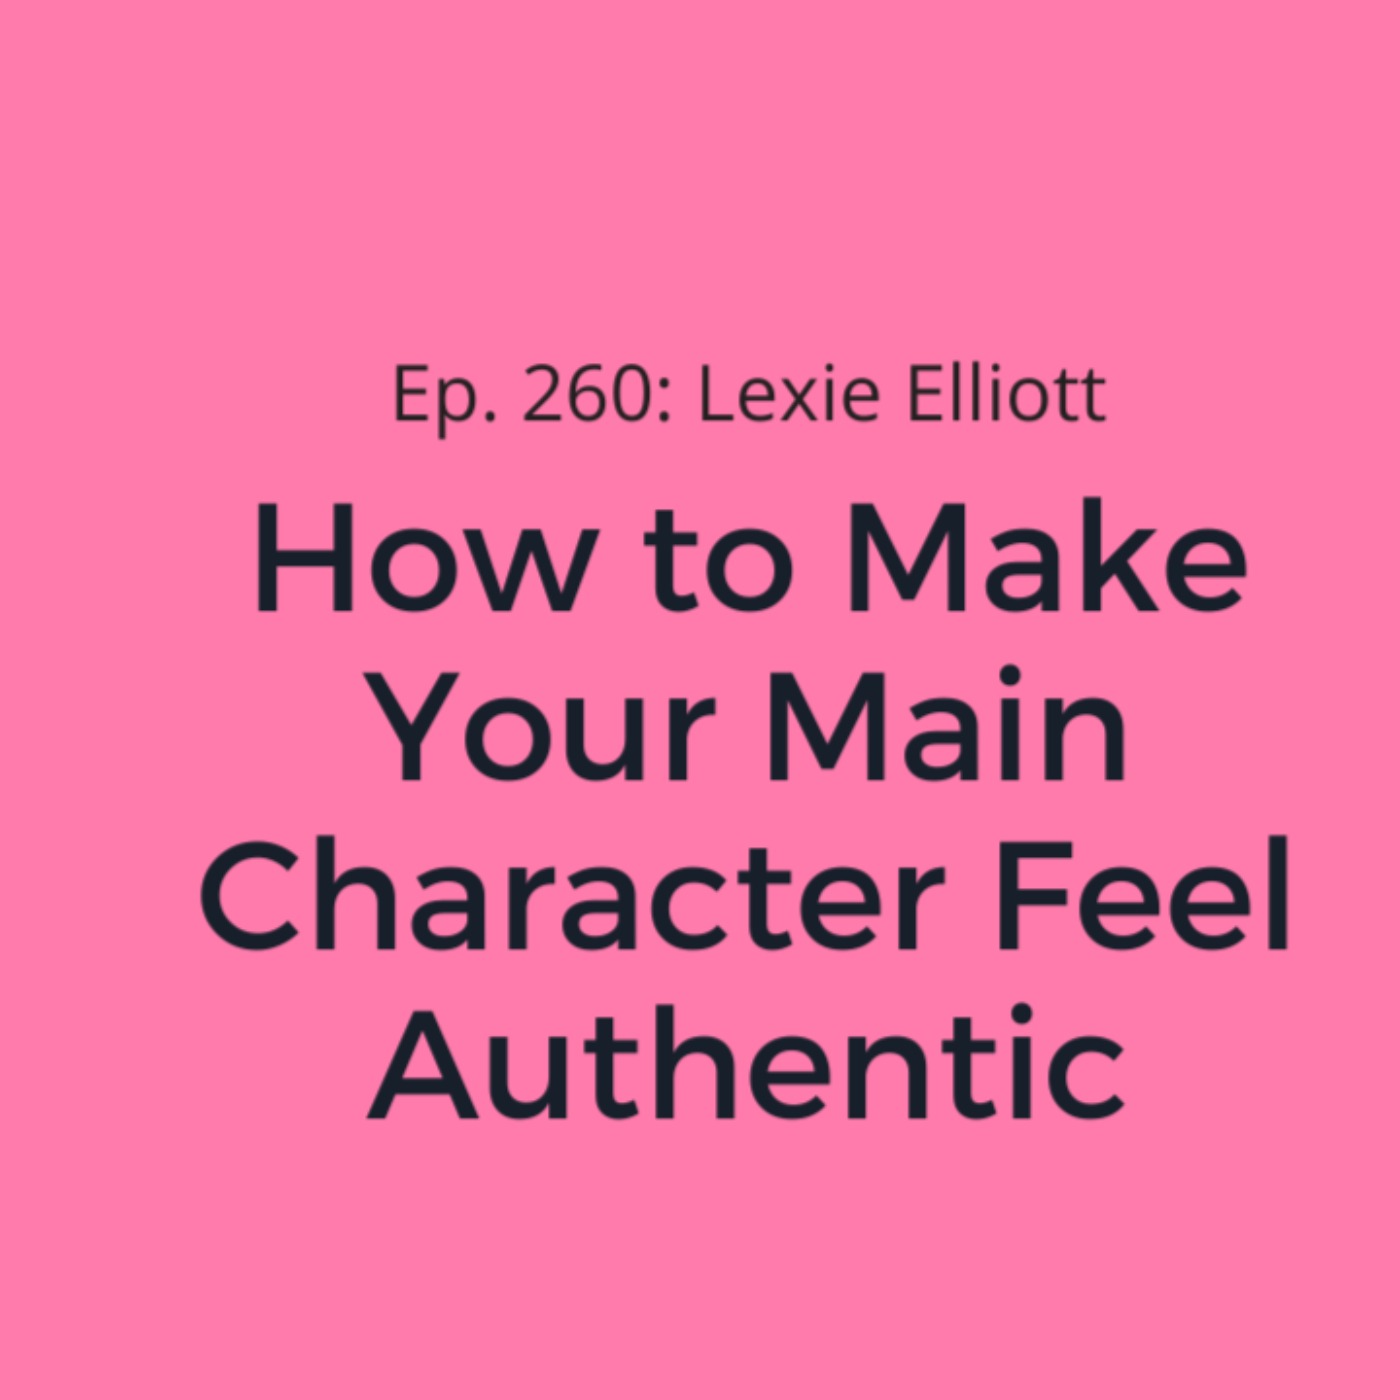 Ep. 260: Lexie Elliott on How to Make Your Main Character Feel Authentic